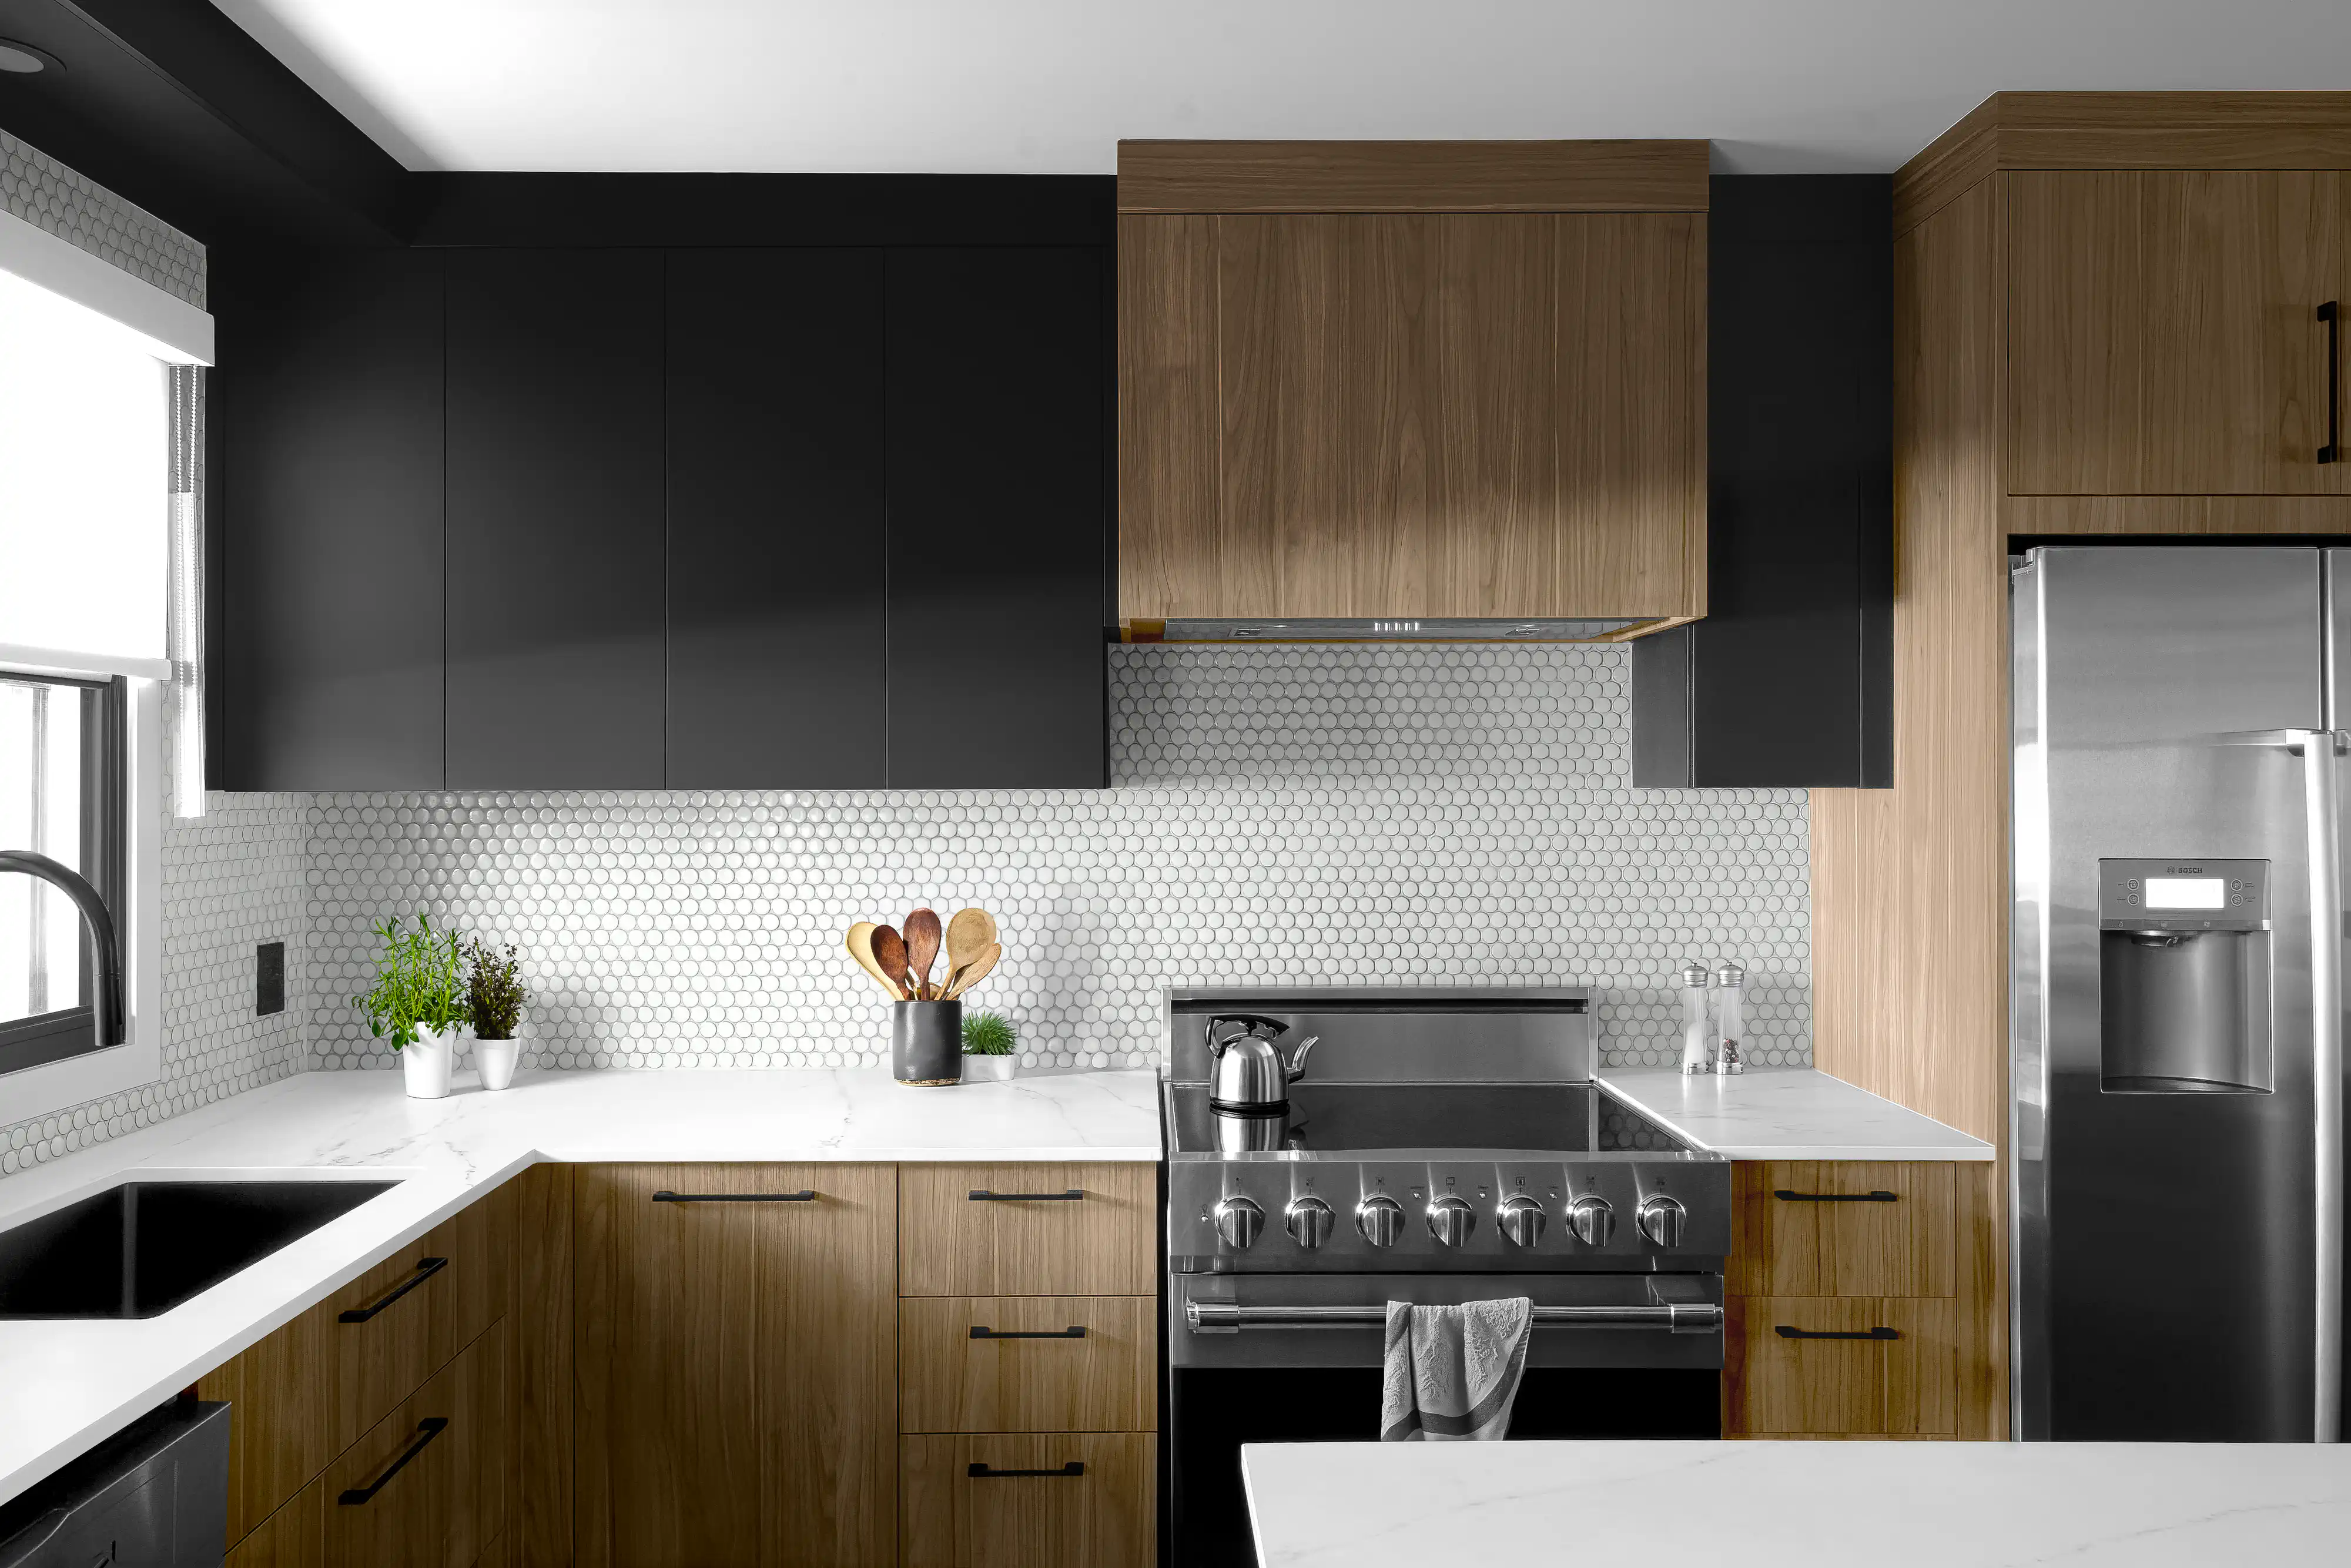 Modern kitchen with black cabinets, wooden accents, and round mosaic backsplash tiles, interior by Sarah Brown Design